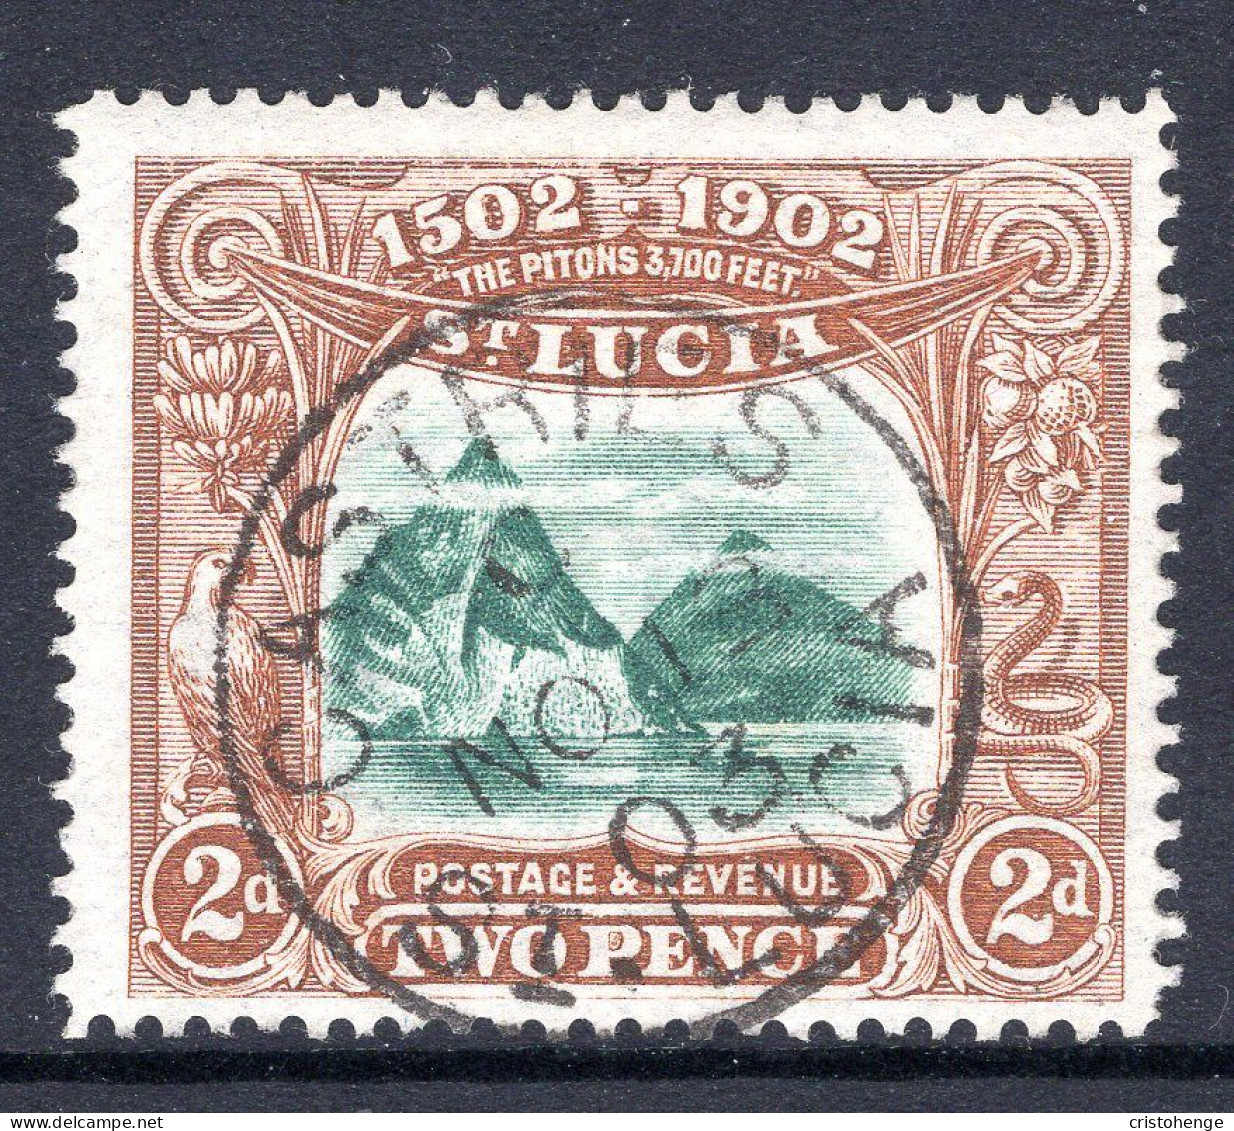 St Lucia 1902 400th Anniversary Of Discovery By Columbus Used (SG 63) - St.Lucia (...-1978)